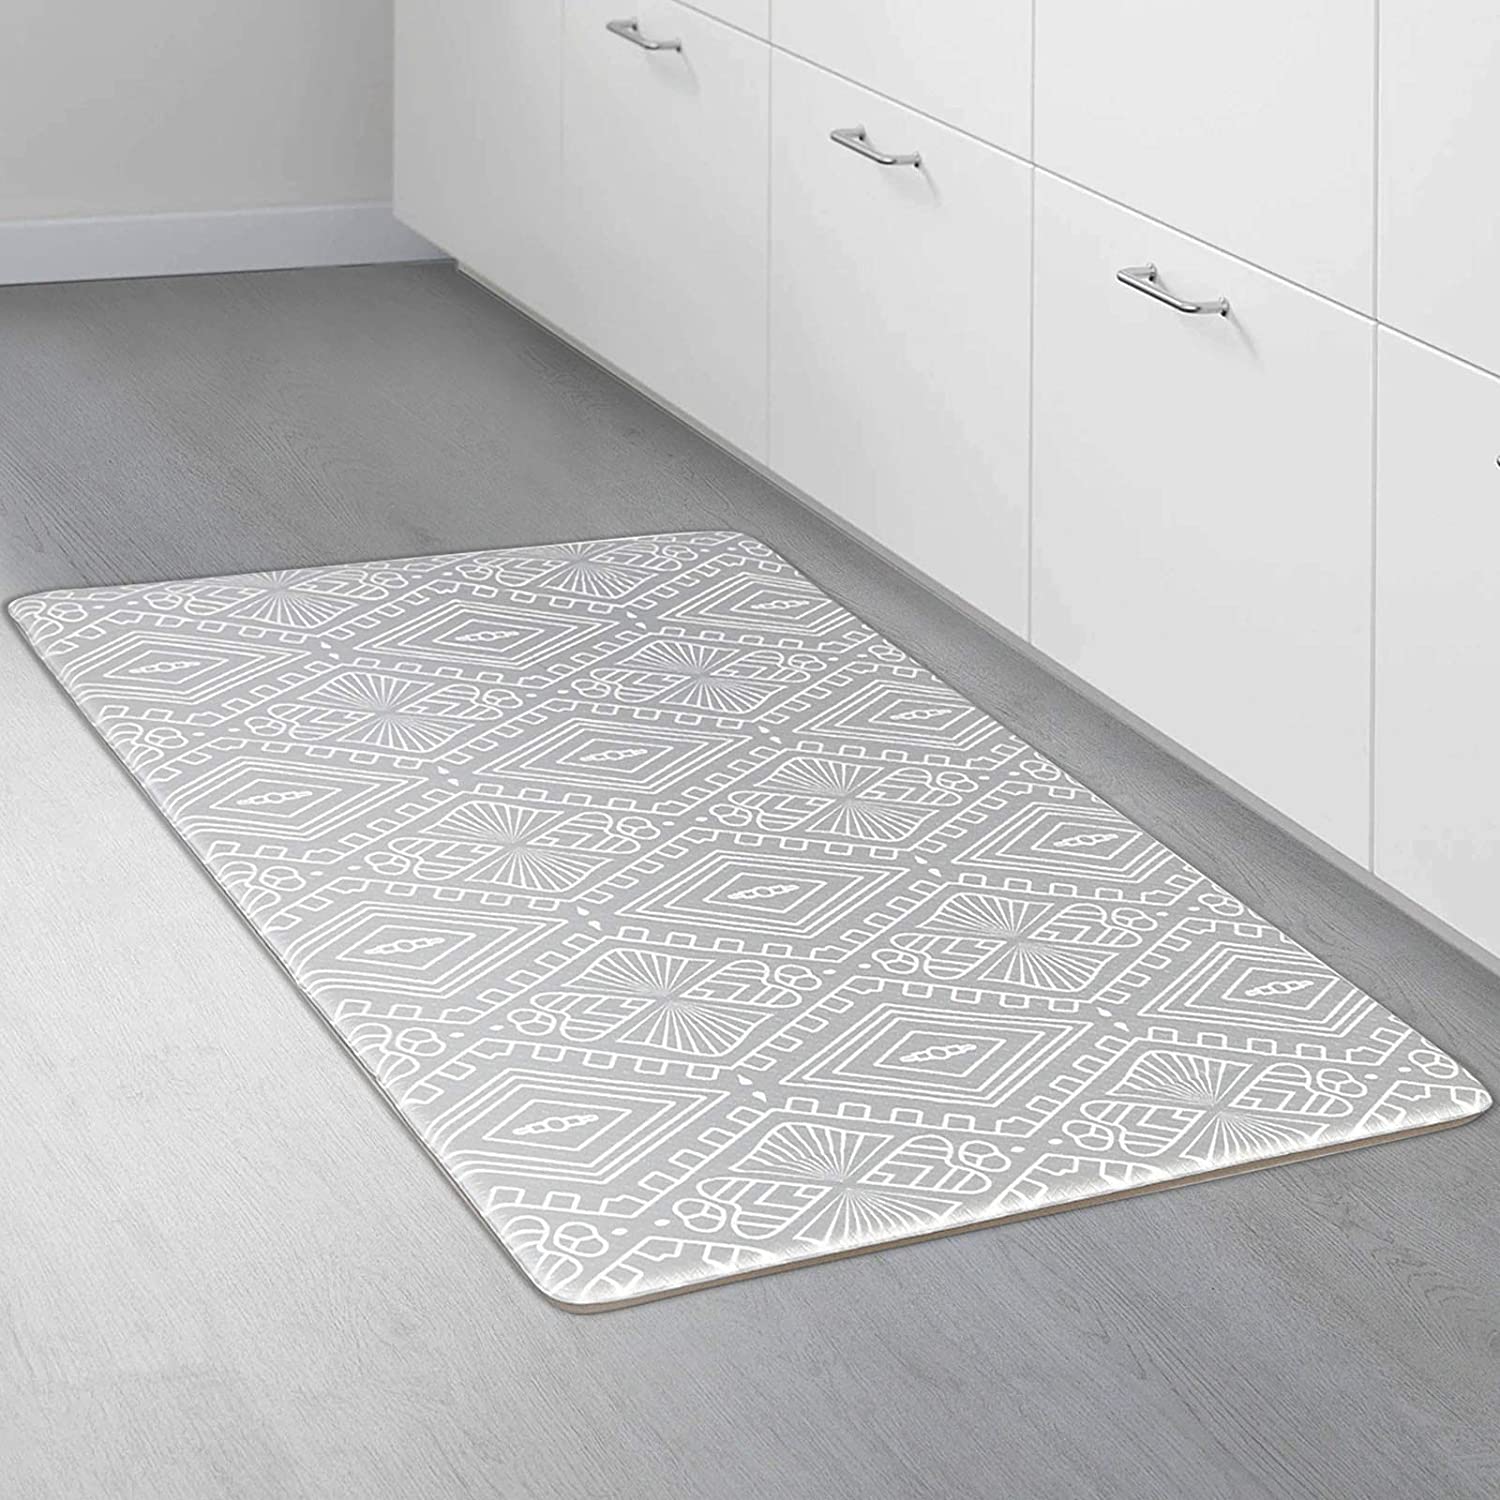 Kitchen Mat Cushioned Anti-fatigue Floor Mat Waterproof Non-slip Kitchen Rug  PVC Comfort Standing Kitchen Mats and Rugs for Office Home 